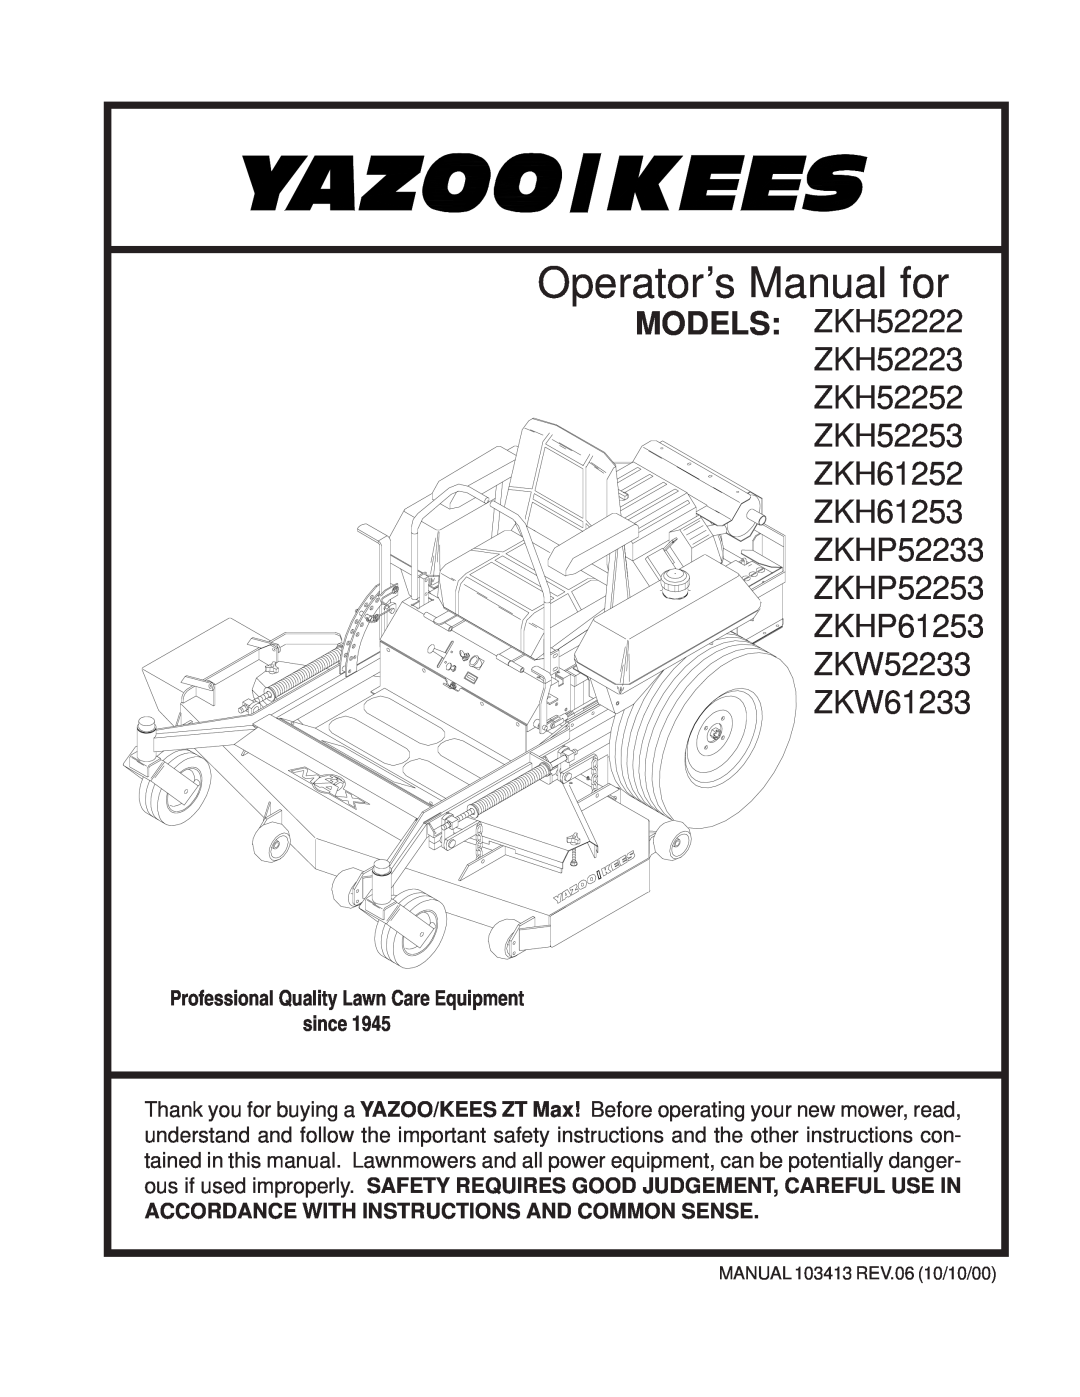 Yazoo/Kees ZKH52252 important safety instructions Operator’s Manual for, MODELS ZKH52222, ZKHP61253 ZKW52233 ZKW61233 